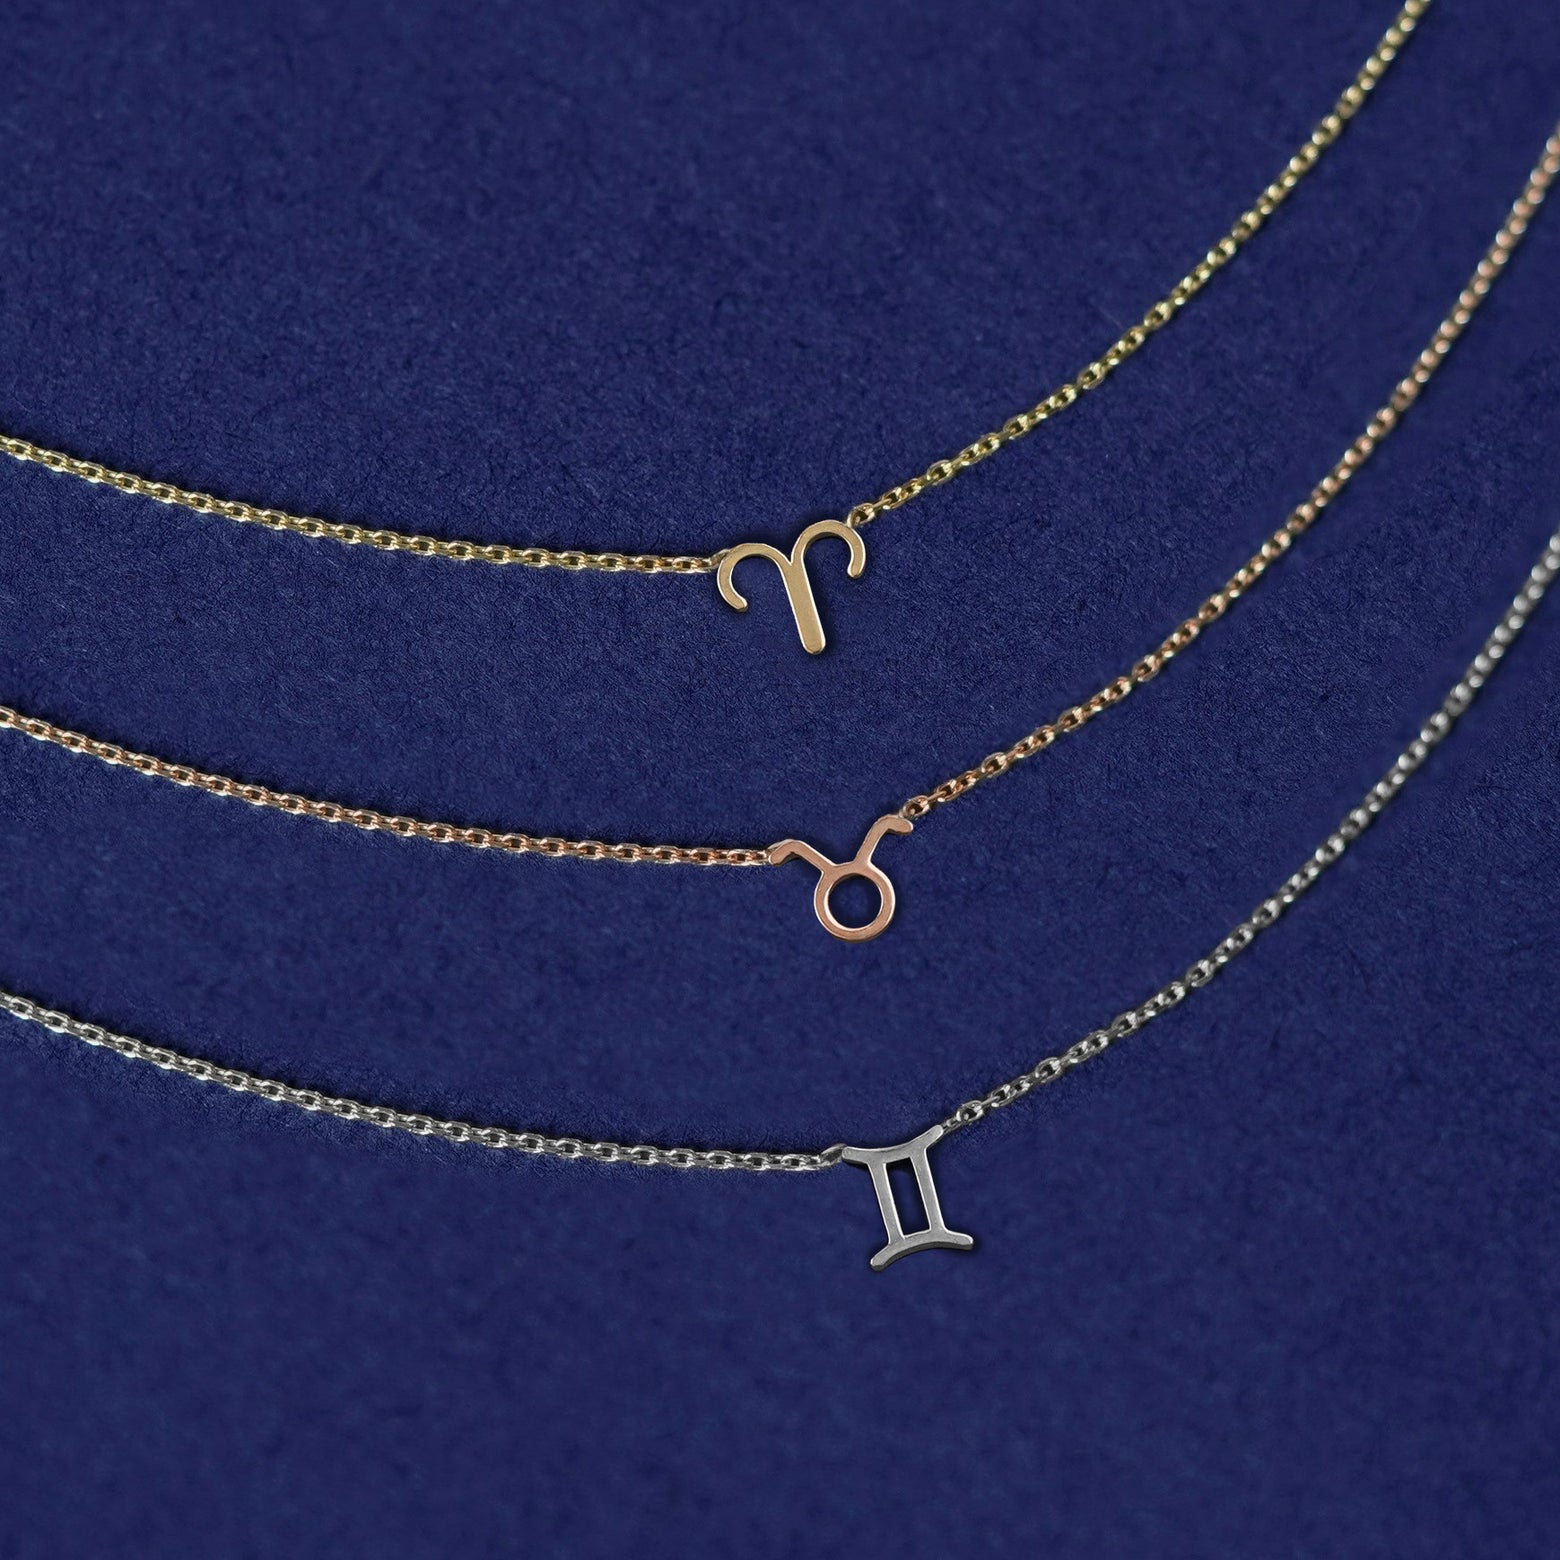 Three Horoscope Cable Necklaces in zodiac symbols of Aries, Taurus and Gemini in yellow, rose, and white gold respectively